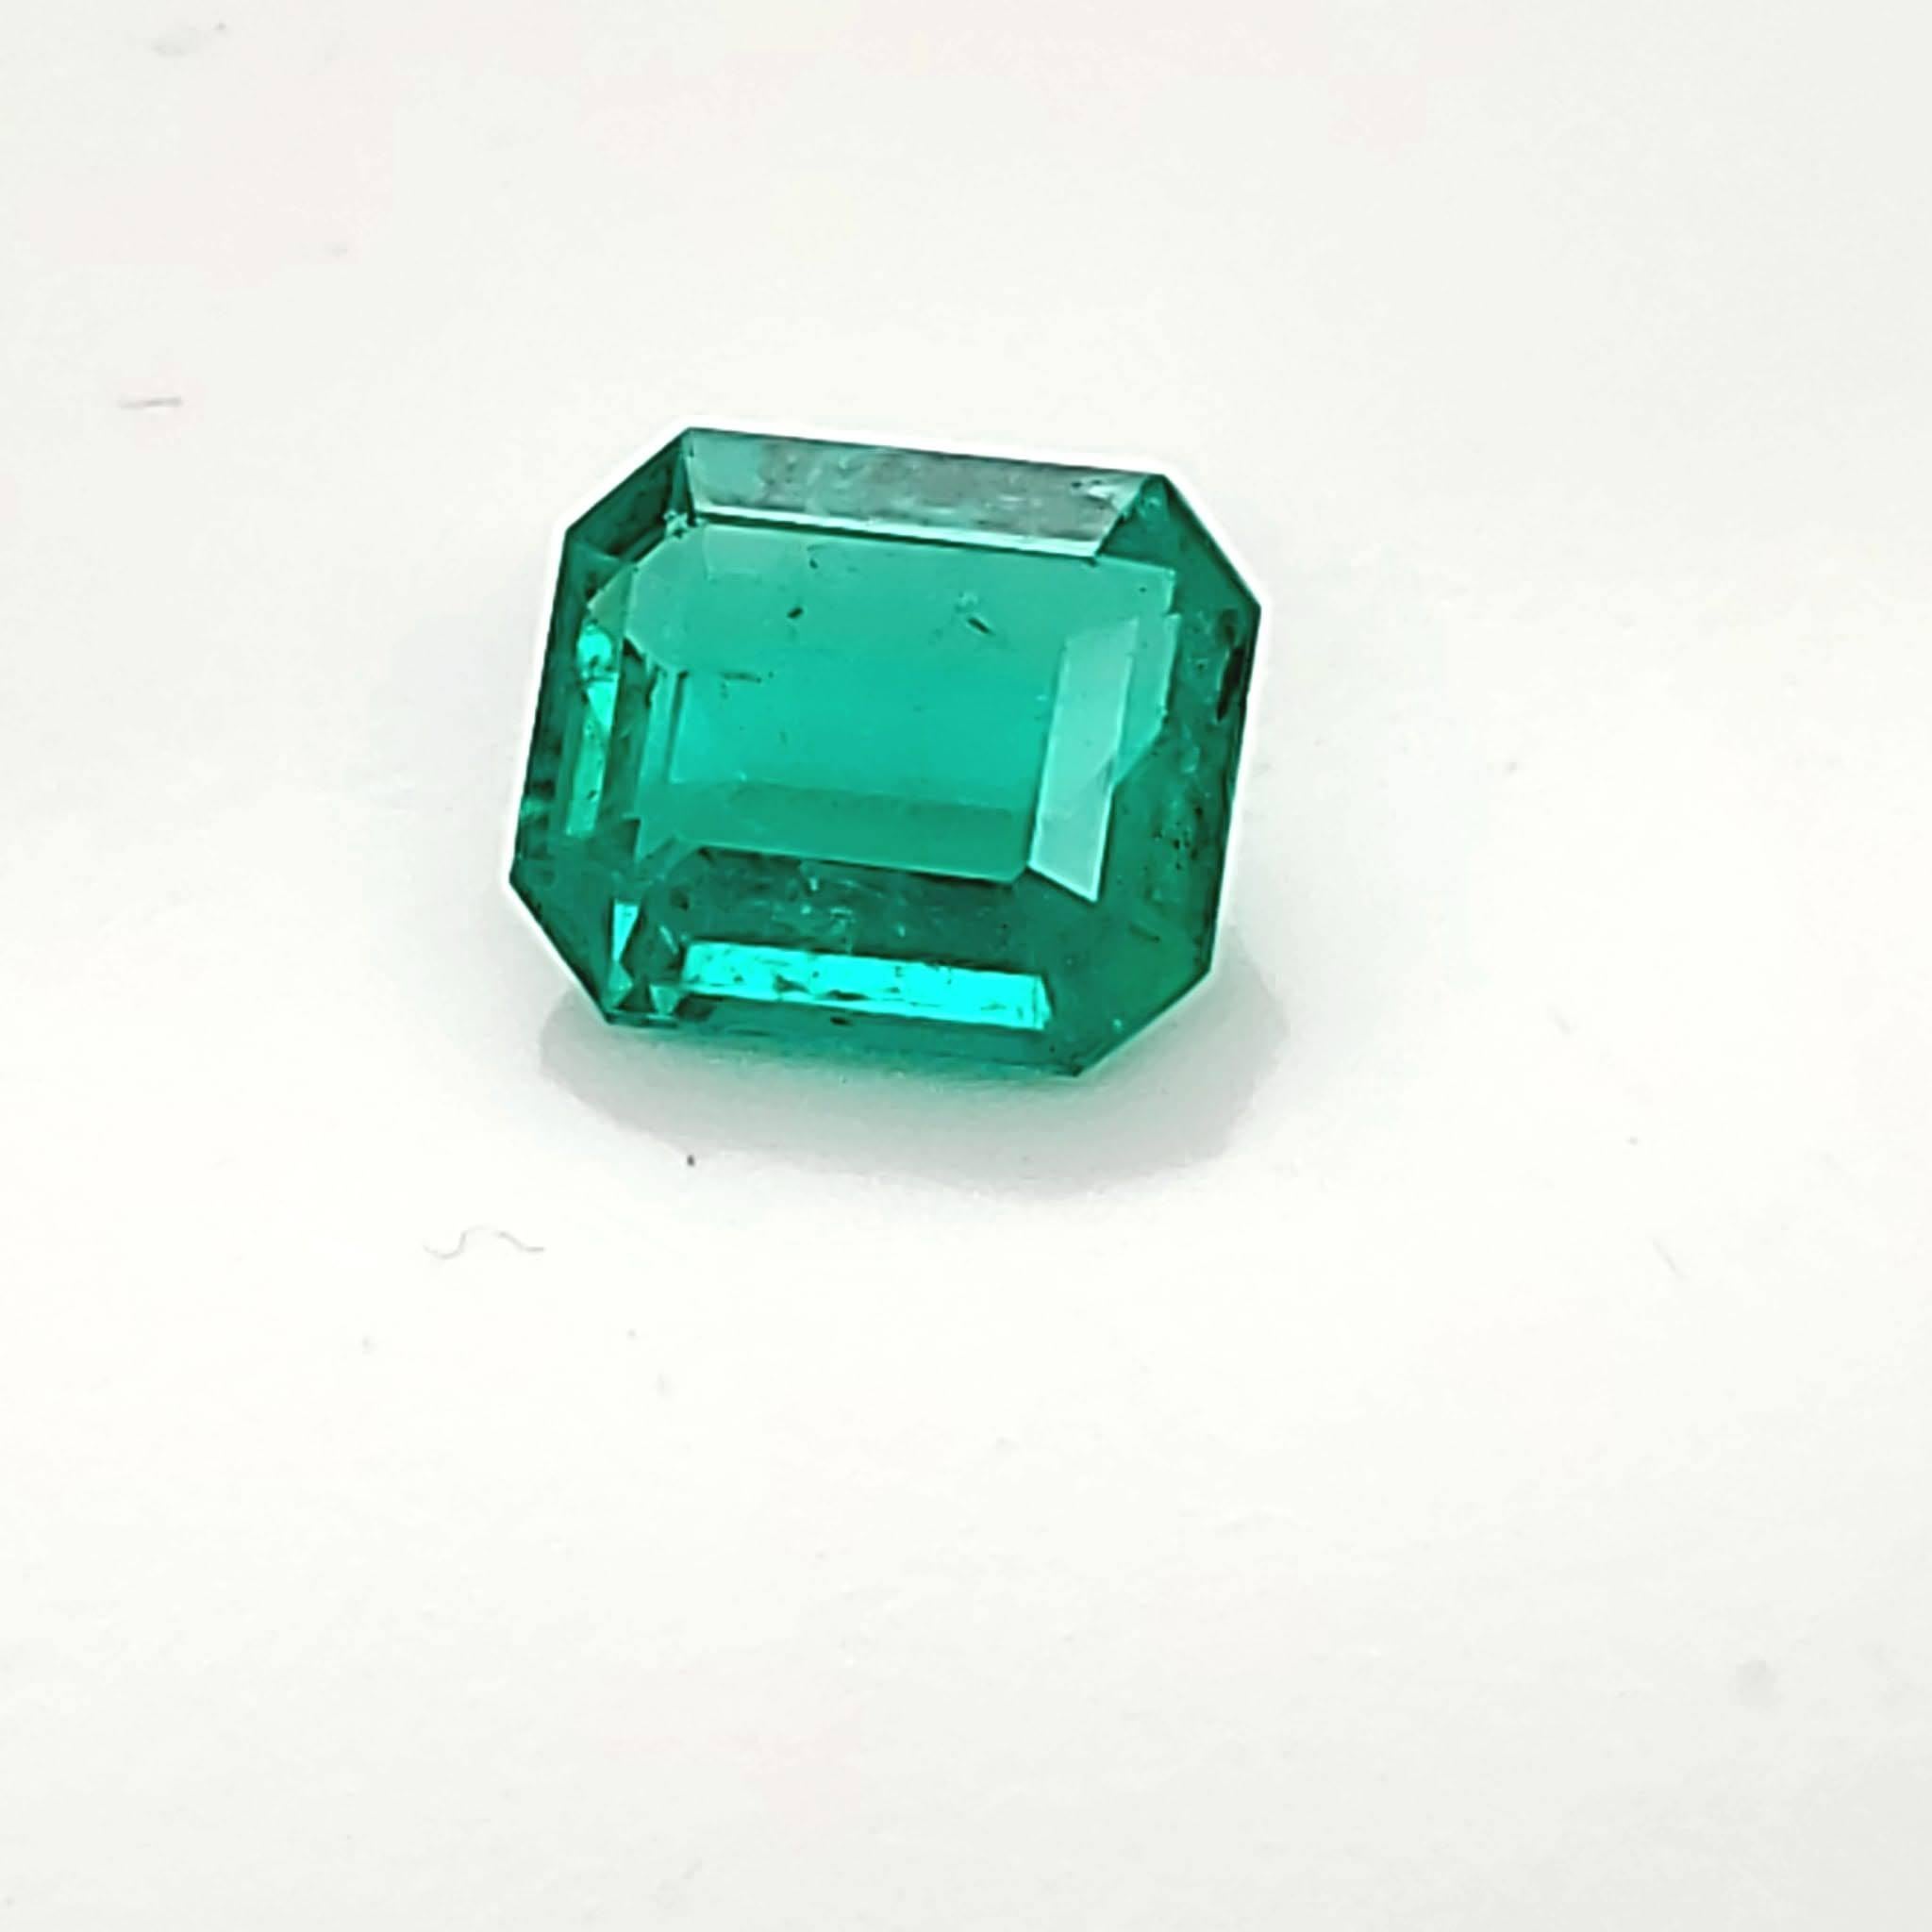 4.04 carats GRS Certified Natural Emerald Precioust Gemstone, ethically sourced from Colombia, very clean and transparent gemstone, beautiful intense green, minor treatment

Only one available for each loose gemstone, perfect for creating a uniquely